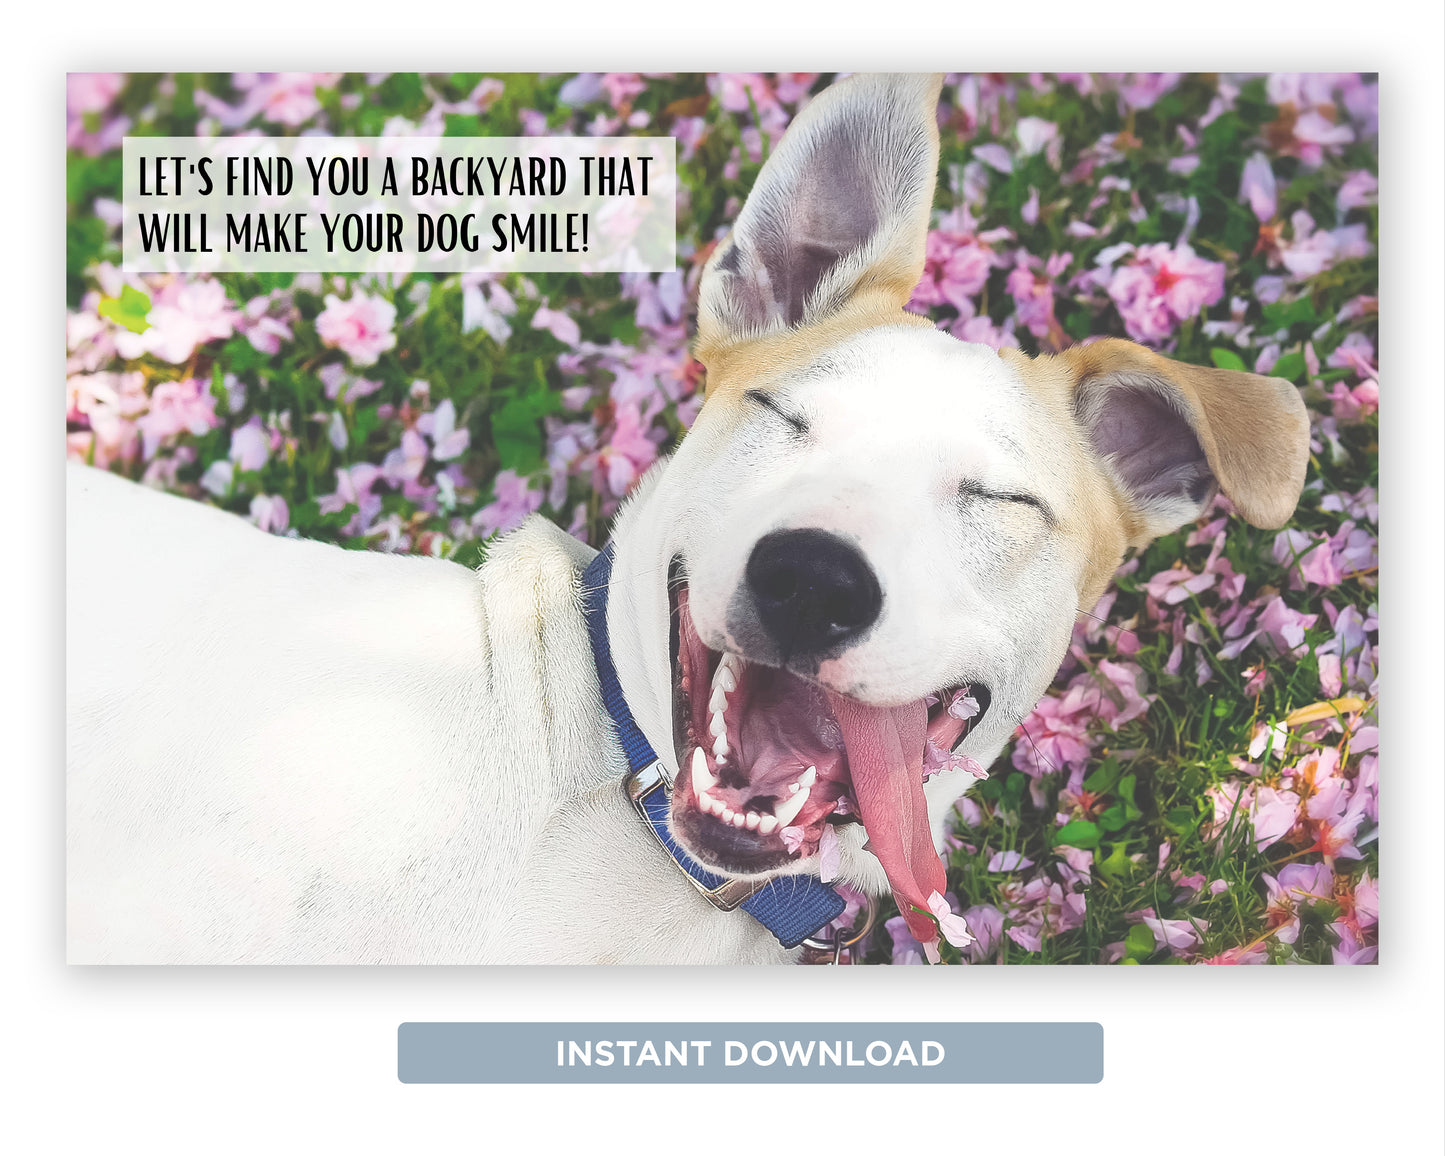 Let's Find You A Backyard Your Dog Will Smile About| Funny Real Estate Postcard Download